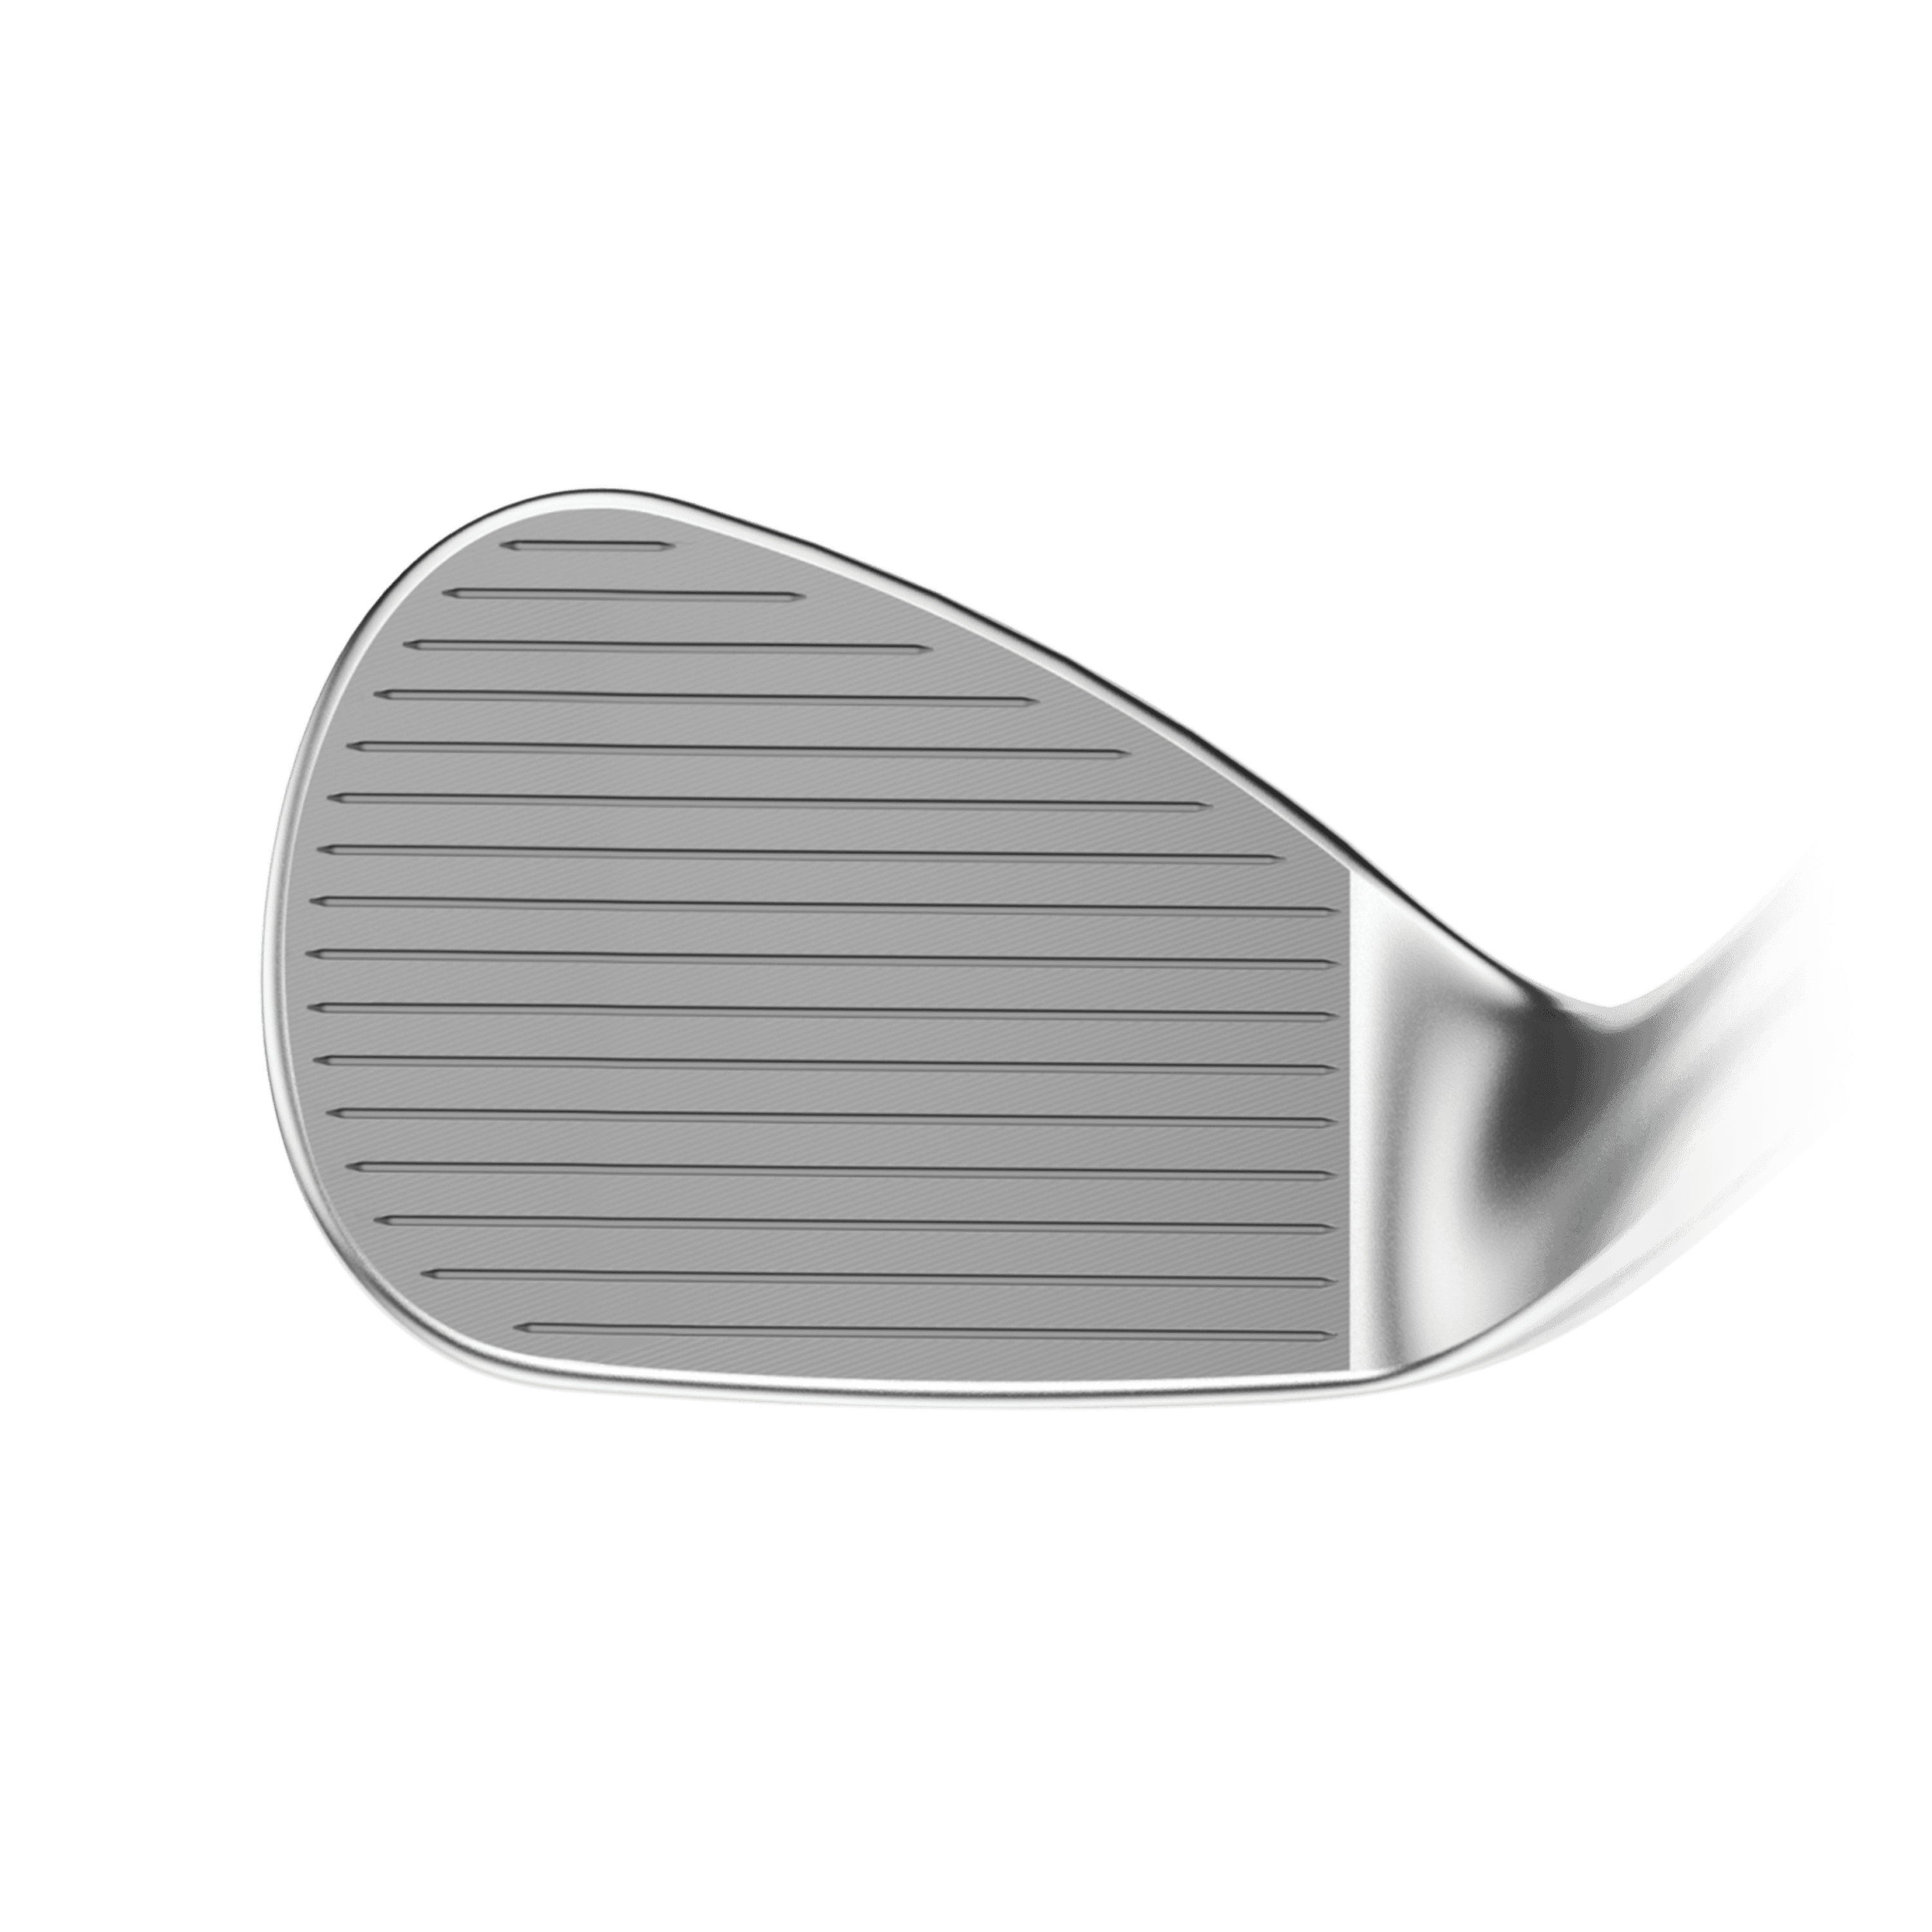 Grooves Across the Face for Maximum Spin and Control